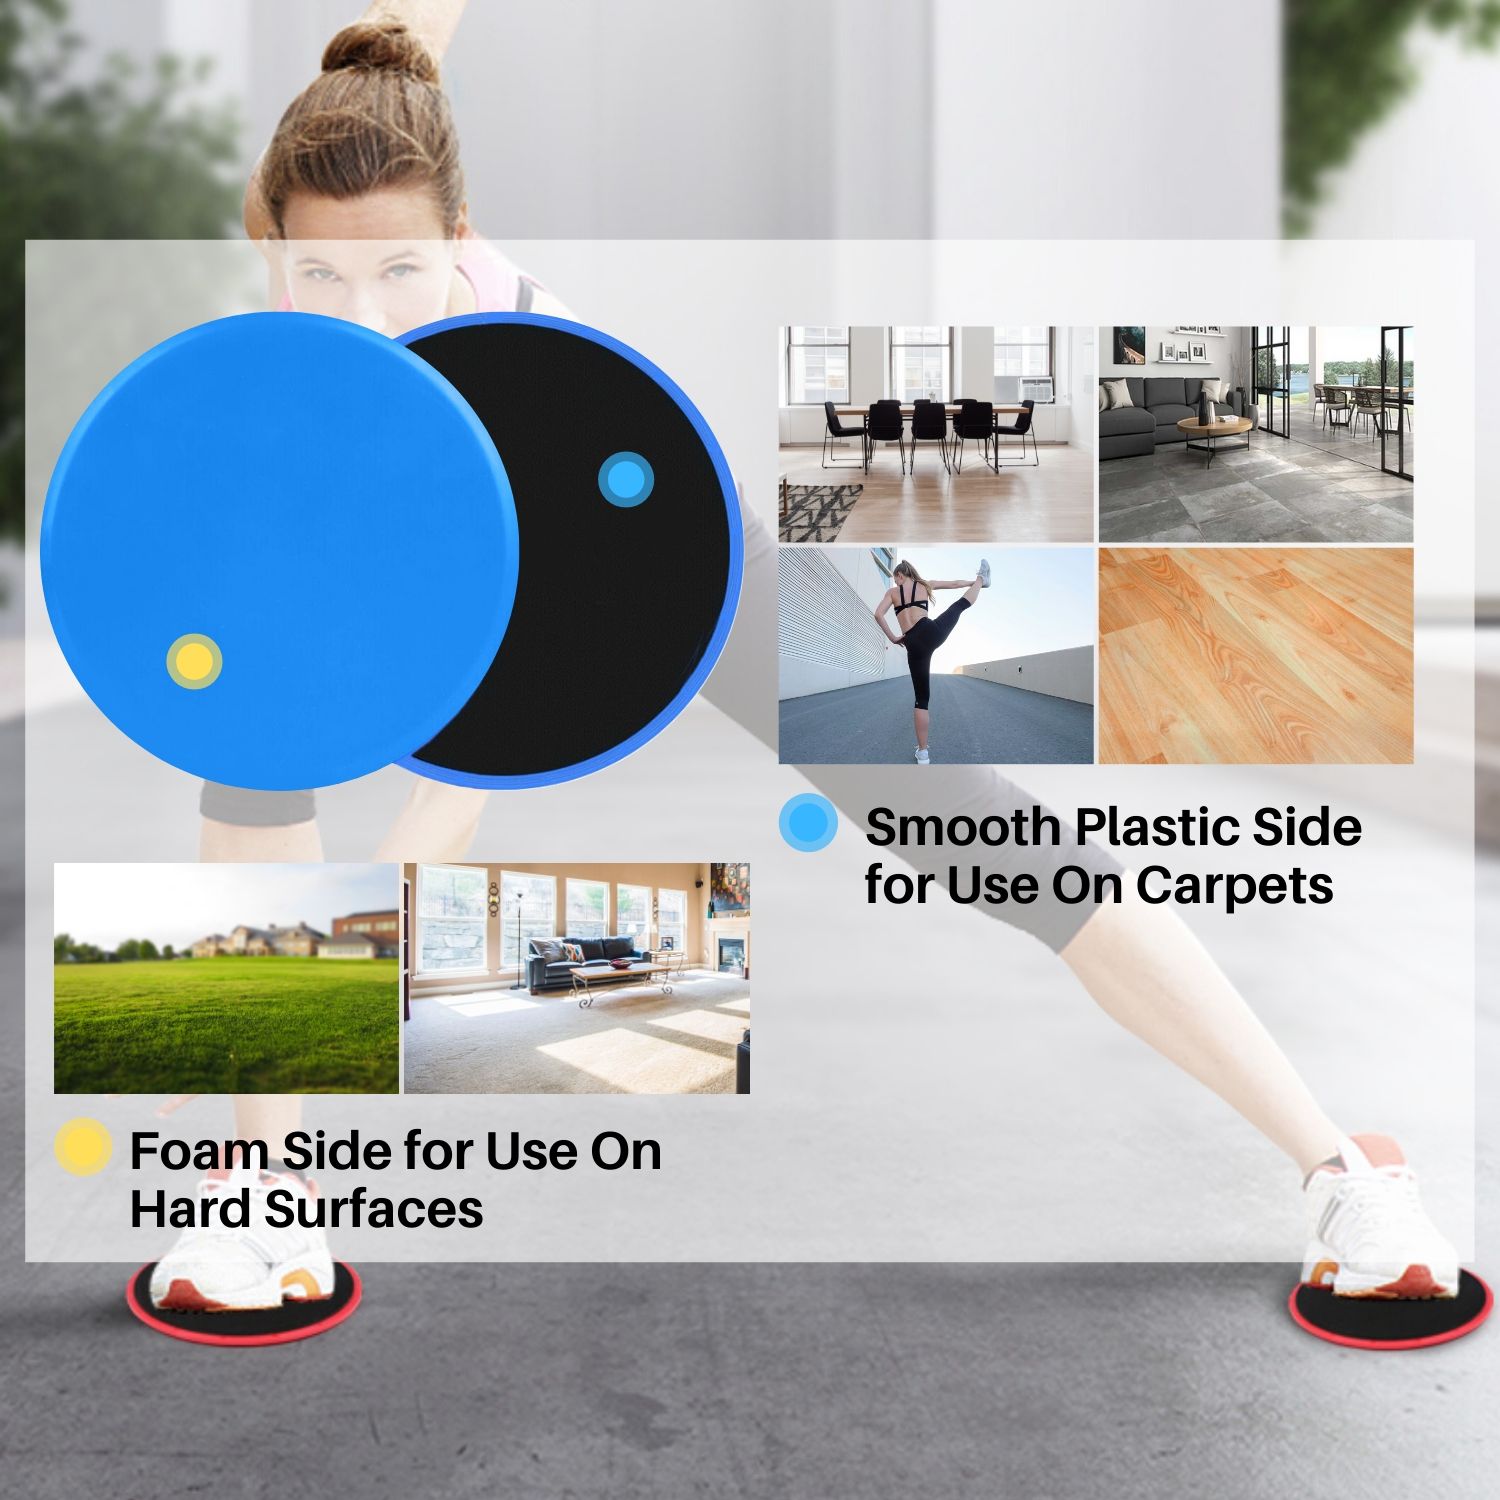 Kalovin Core Sliders – Dual Sided Gliding Discs Used on Carpet or Hardwood  Floors. Perfect for Abdominal & Core Workouts at Home or Travel – Kalovin  Classic Shop